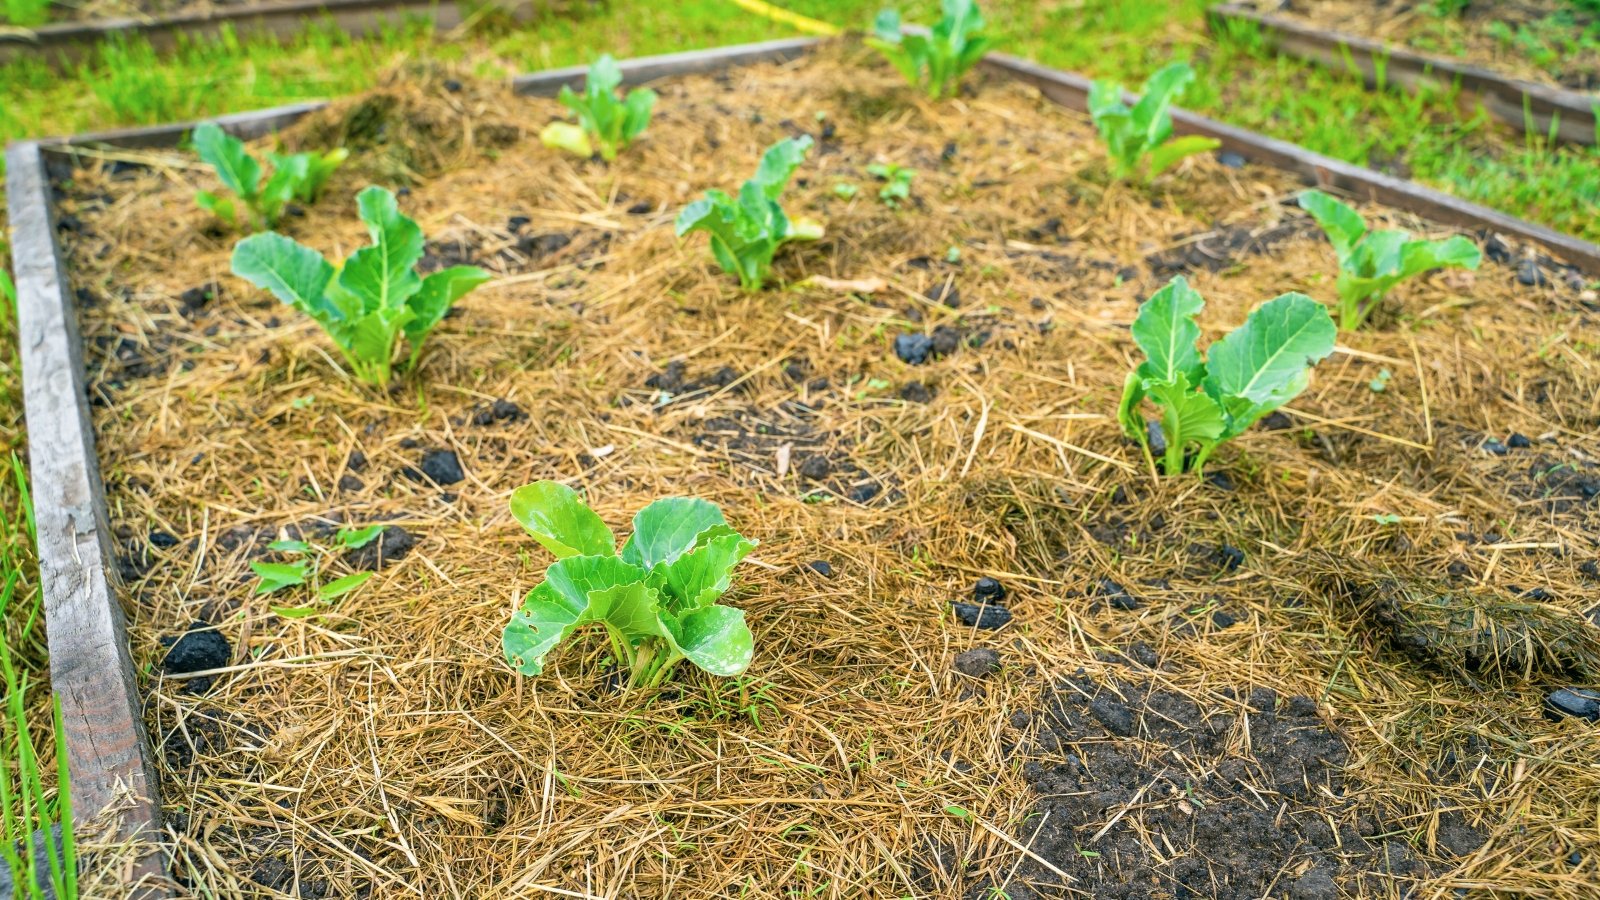 Close-up of a raised bed with a layer of mulch and young cauliflower seedlings growing in rows producing large, bright green leaves with slightly wavy edges.